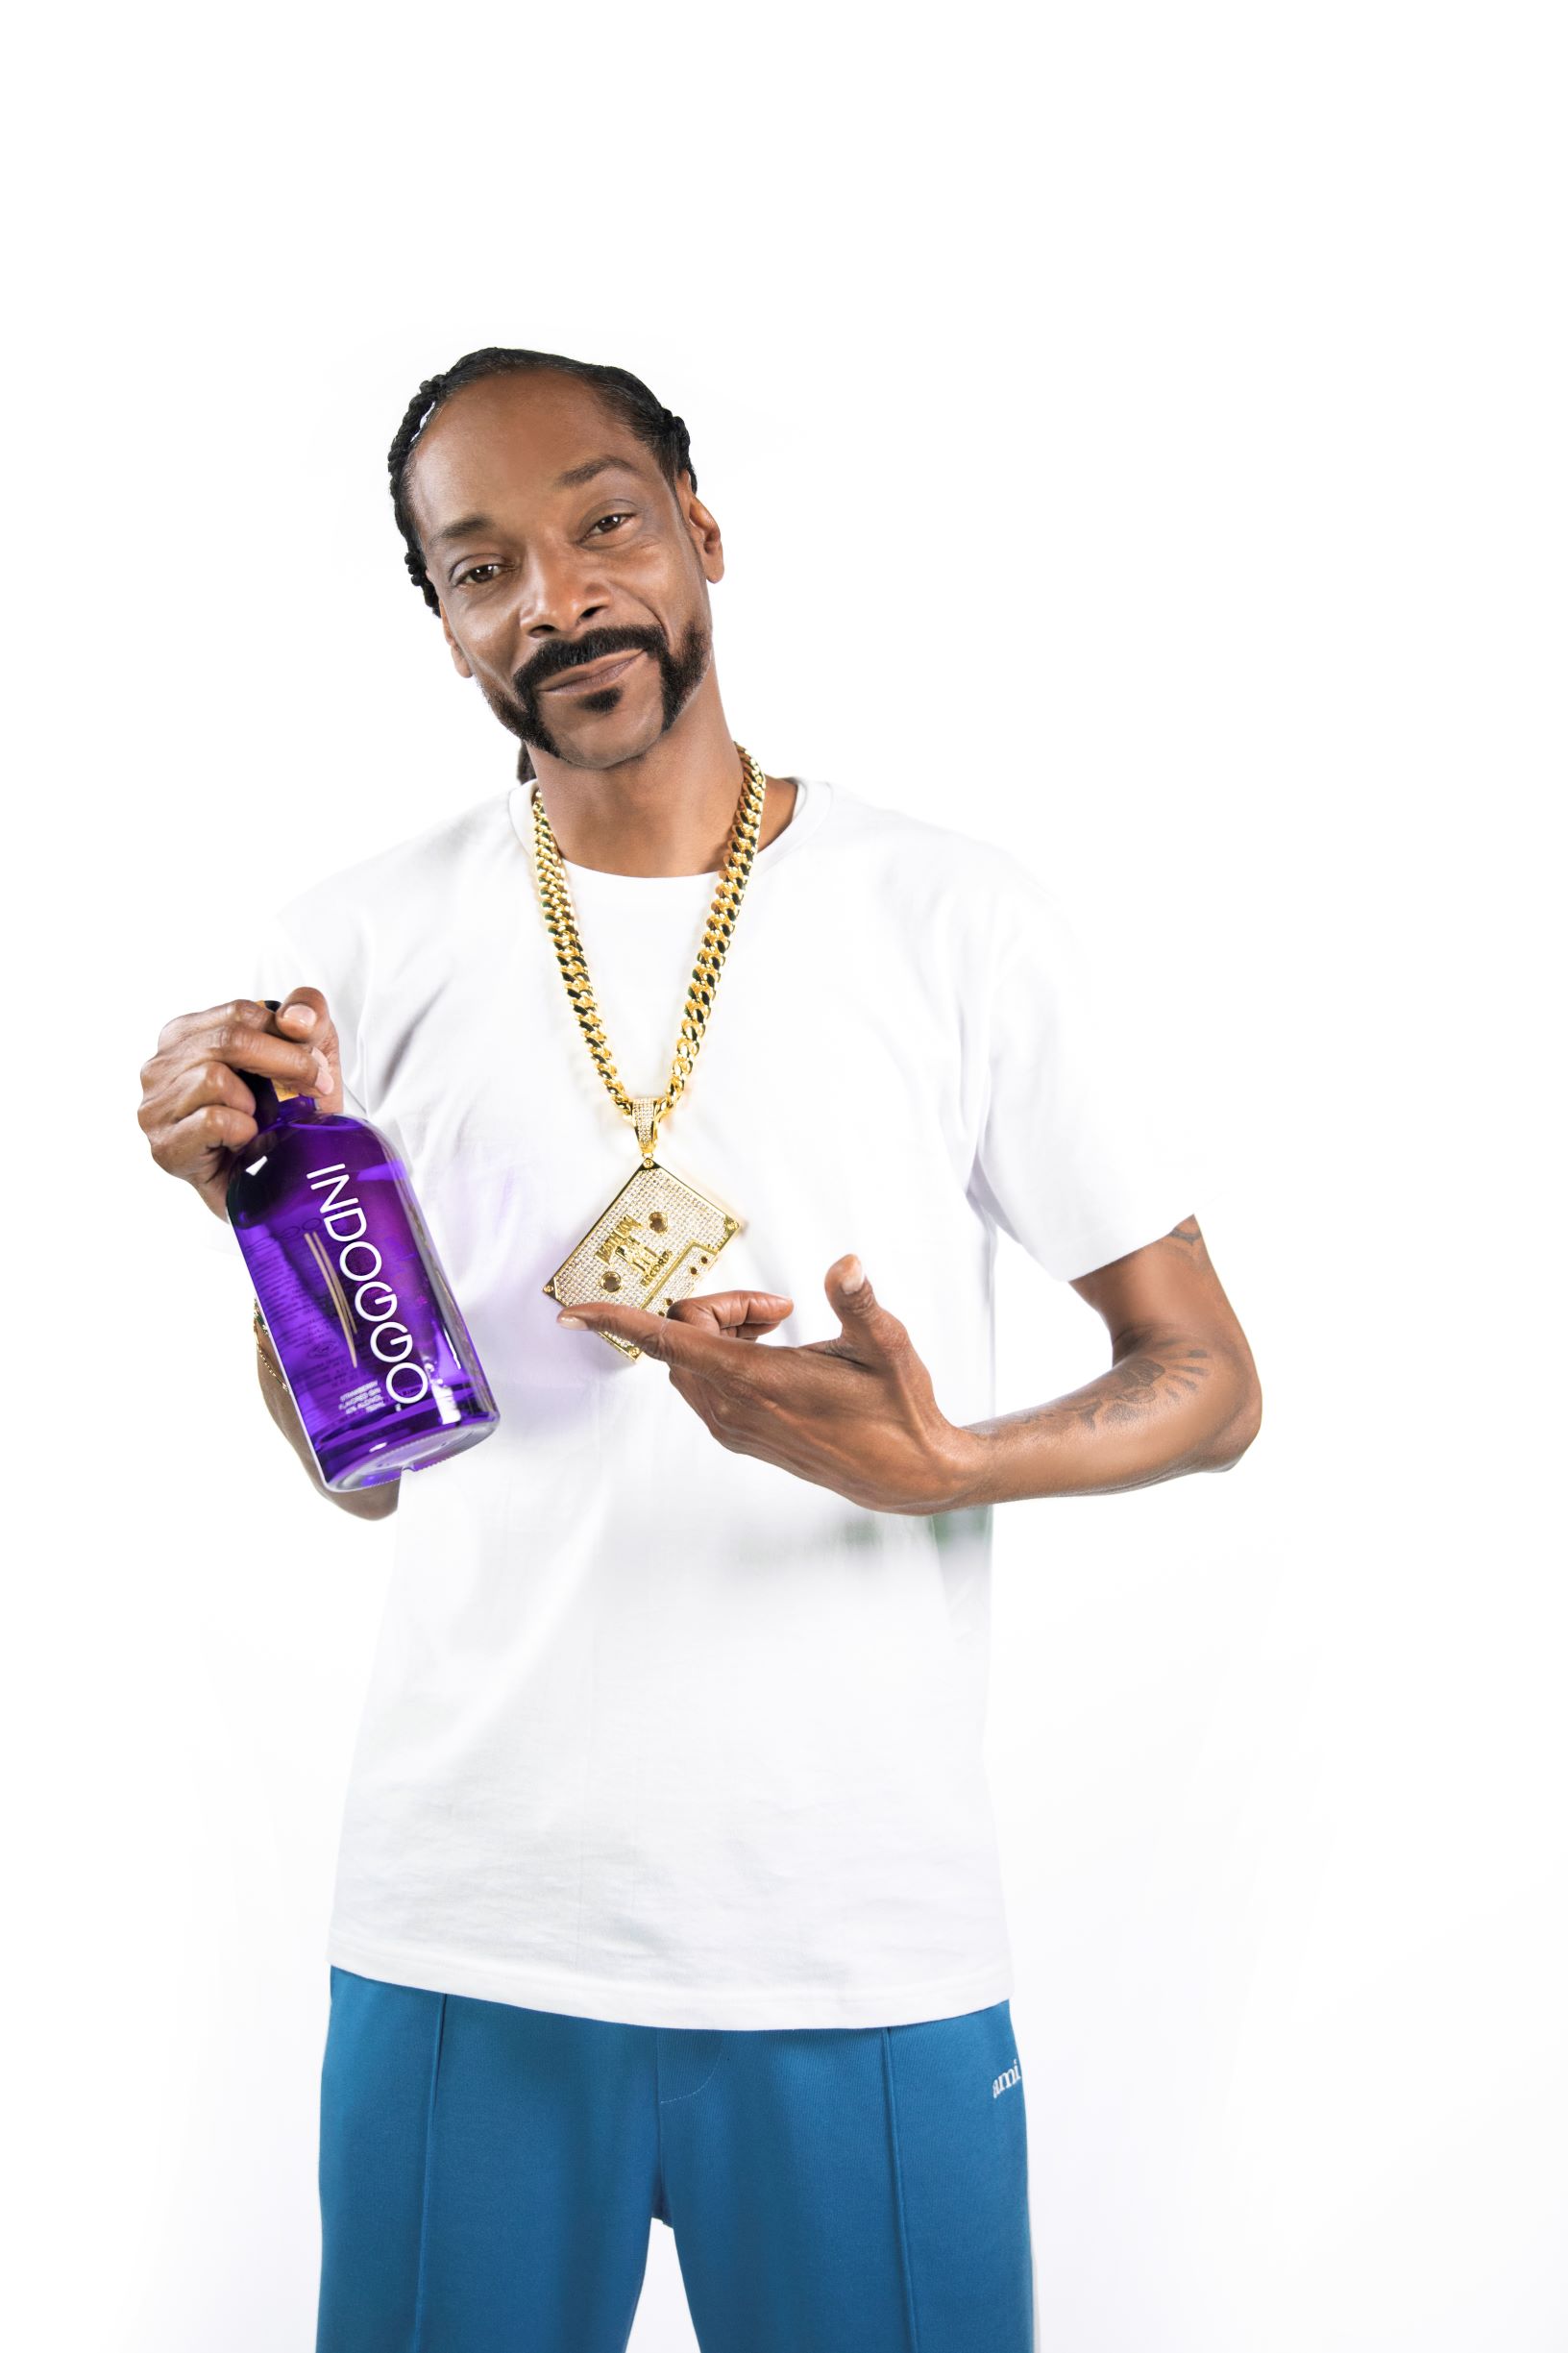 Snoop Dogg Returns To 'Gin & Juice' Roots With 'Indoggo' Strawberry-Flavored Gin - Maxim